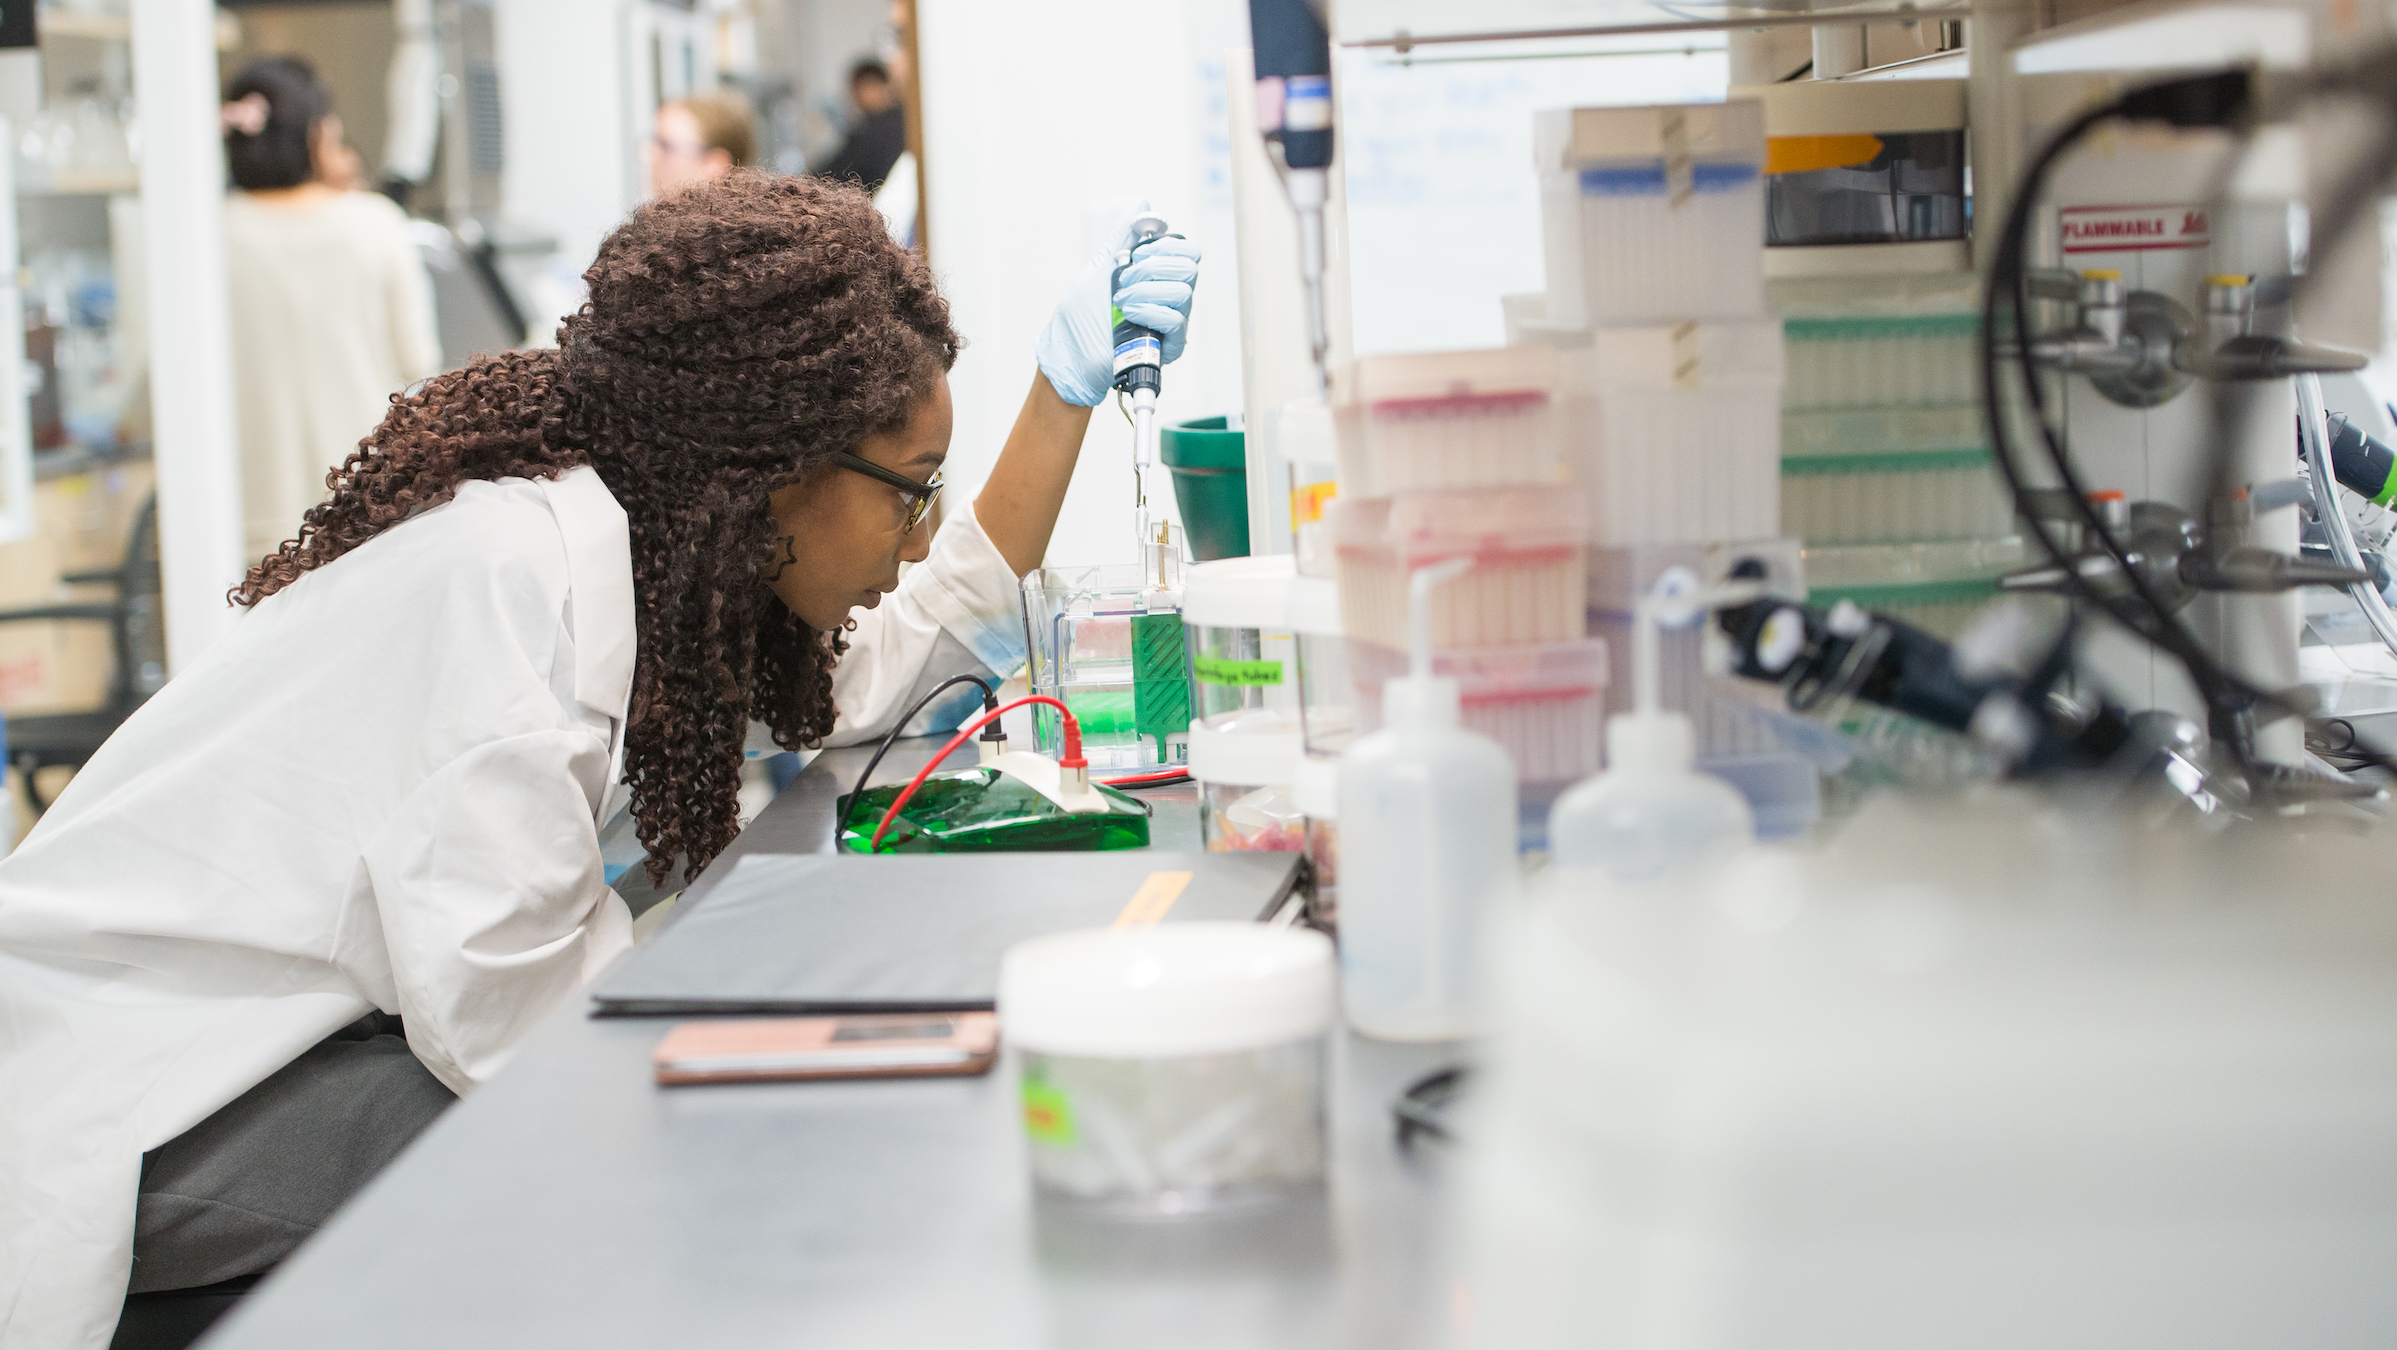 A student researcher pipettes in a lab wearing a lab coat